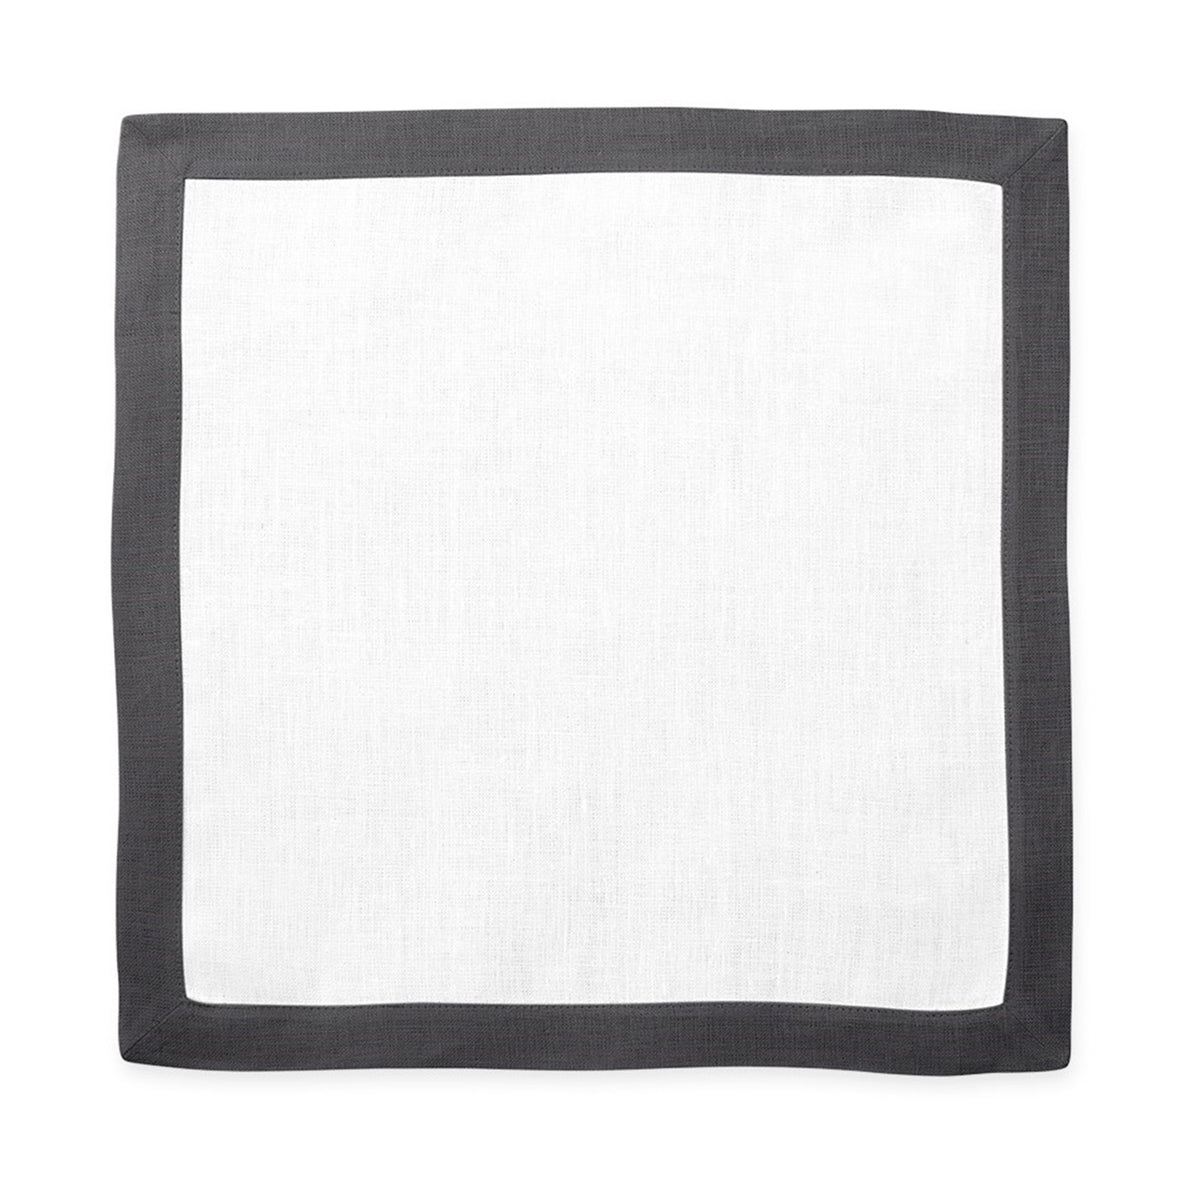 Silo Image of Matouk Border Placemat in Color Smoke Grey